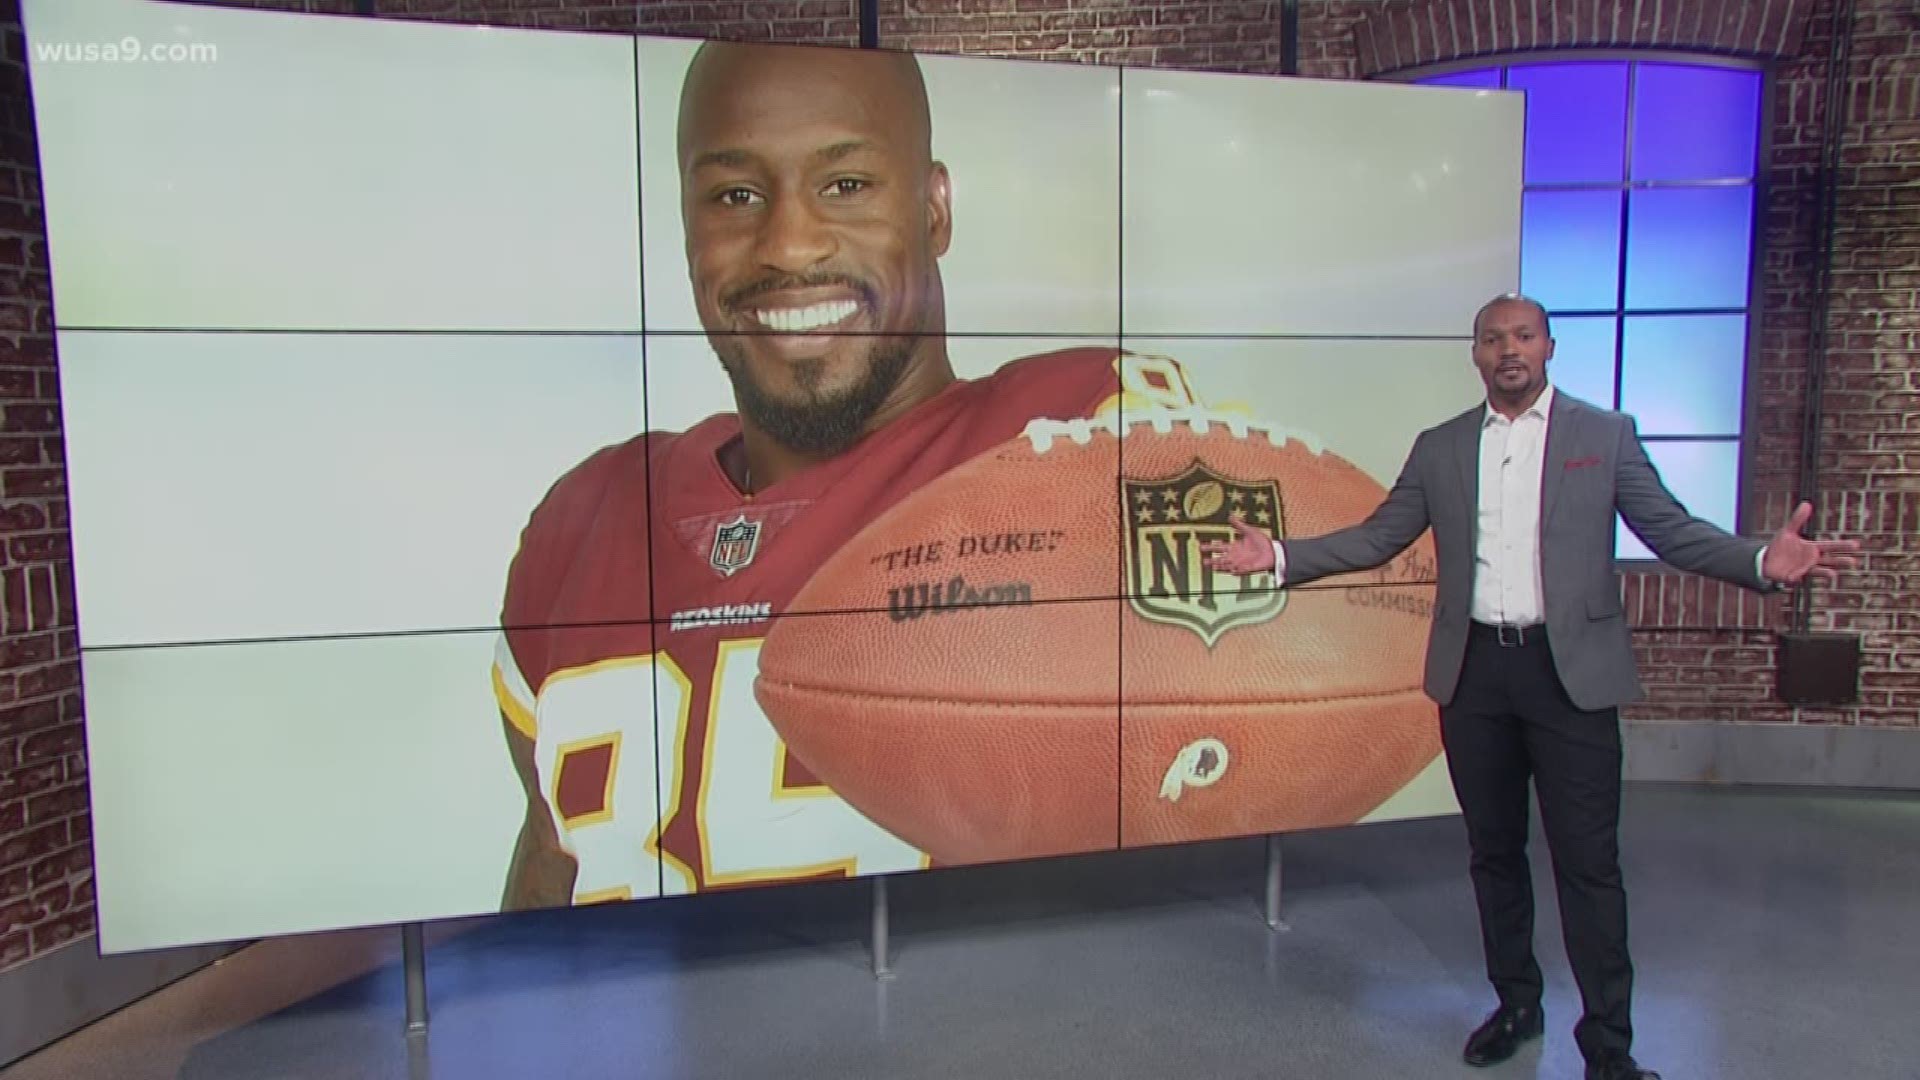 After four seasons with the Washington Redskins, Vernon Davis is leaving the NFL and football after more than a decade playing professionally.